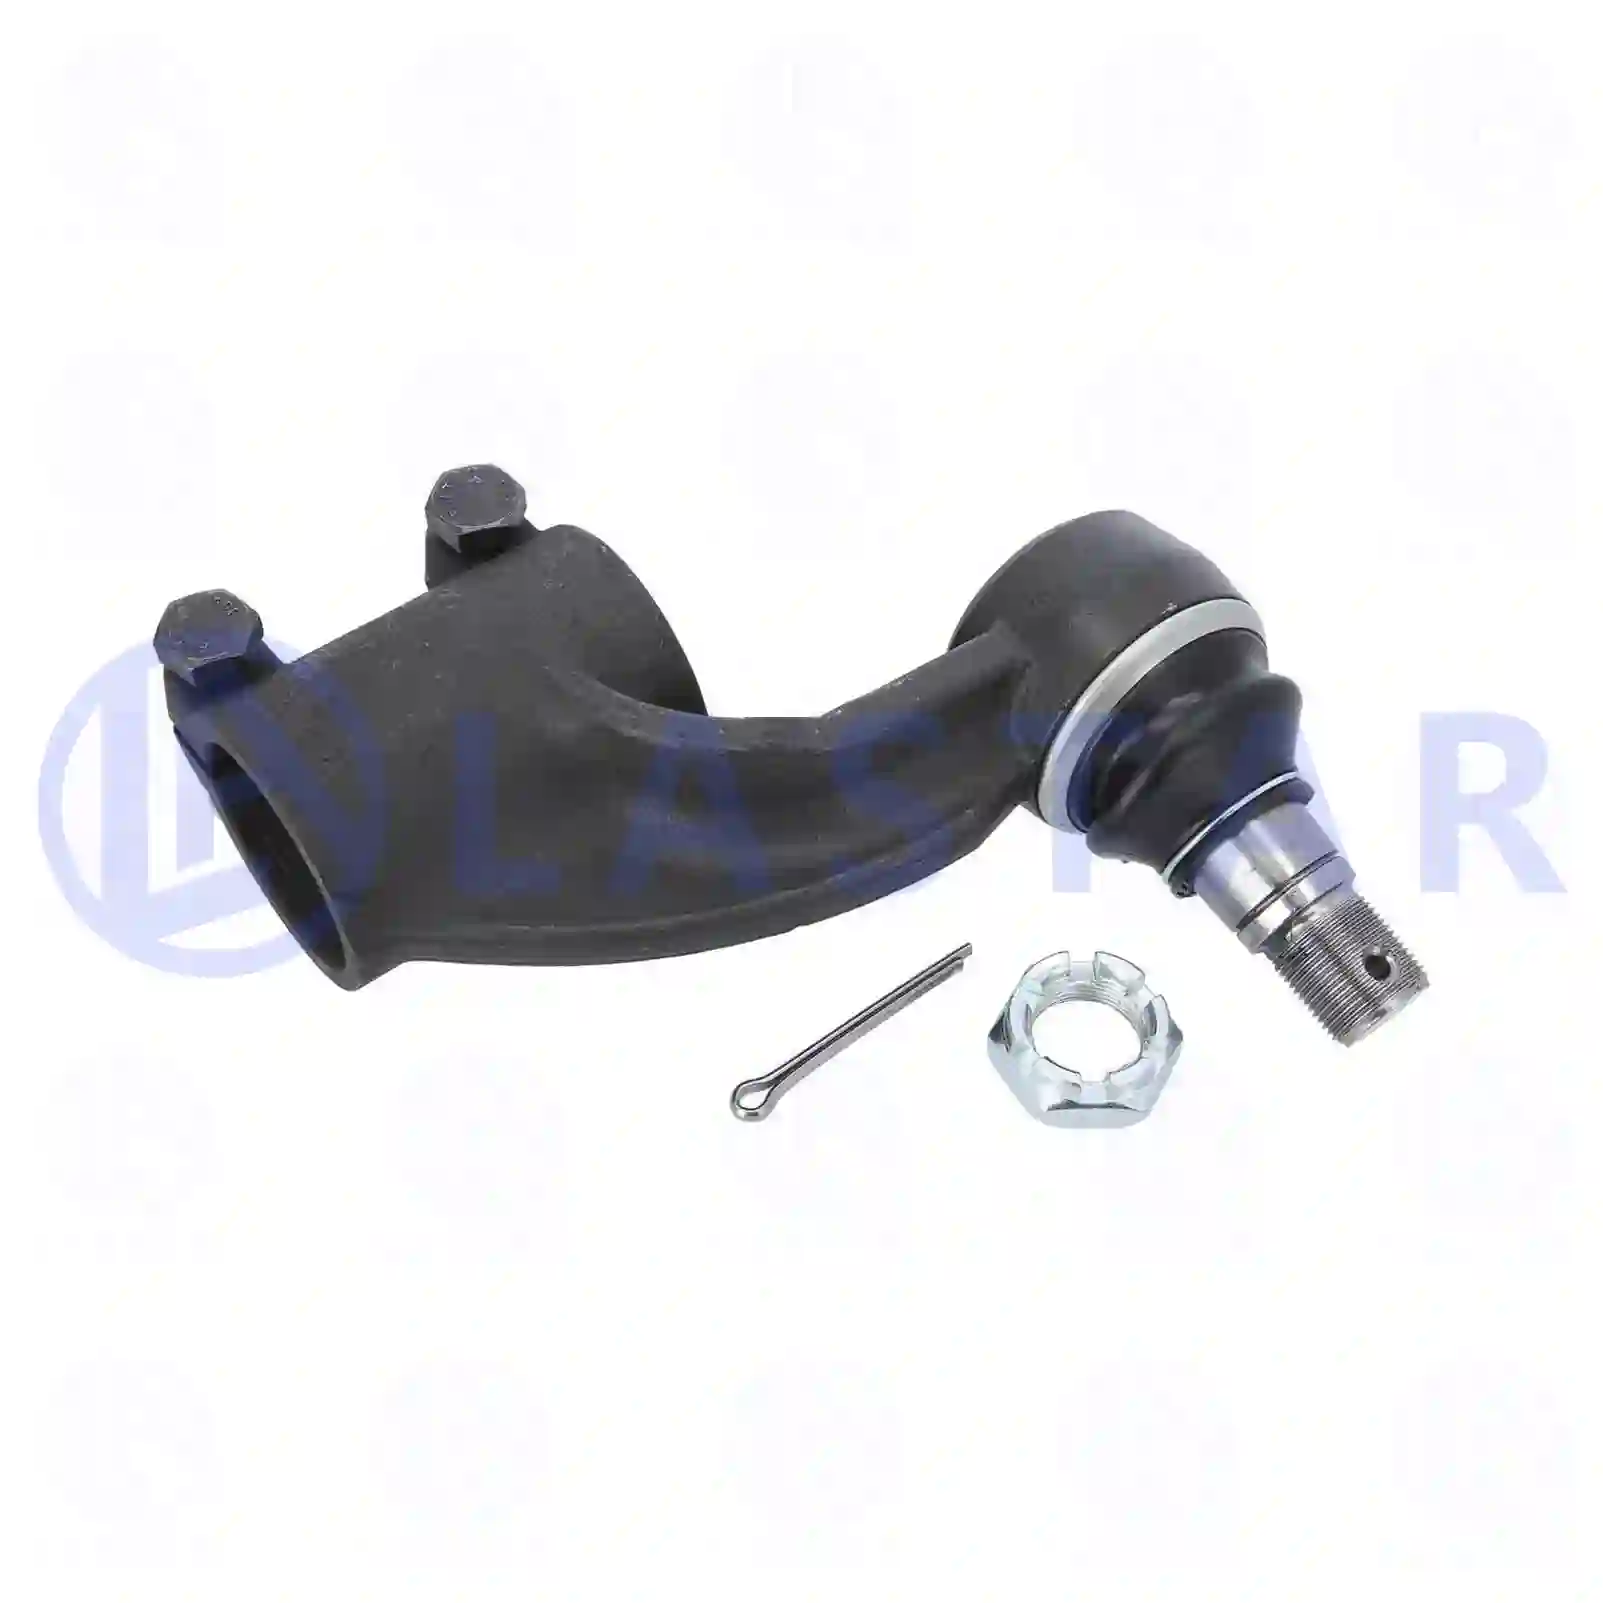 Ball joint, left hand thread, 77705624, 310979, 539412, ZG40345-0008 ||  77705624 Lastar Spare Part | Truck Spare Parts, Auotomotive Spare Parts Ball joint, left hand thread, 77705624, 310979, 539412, ZG40345-0008 ||  77705624 Lastar Spare Part | Truck Spare Parts, Auotomotive Spare Parts